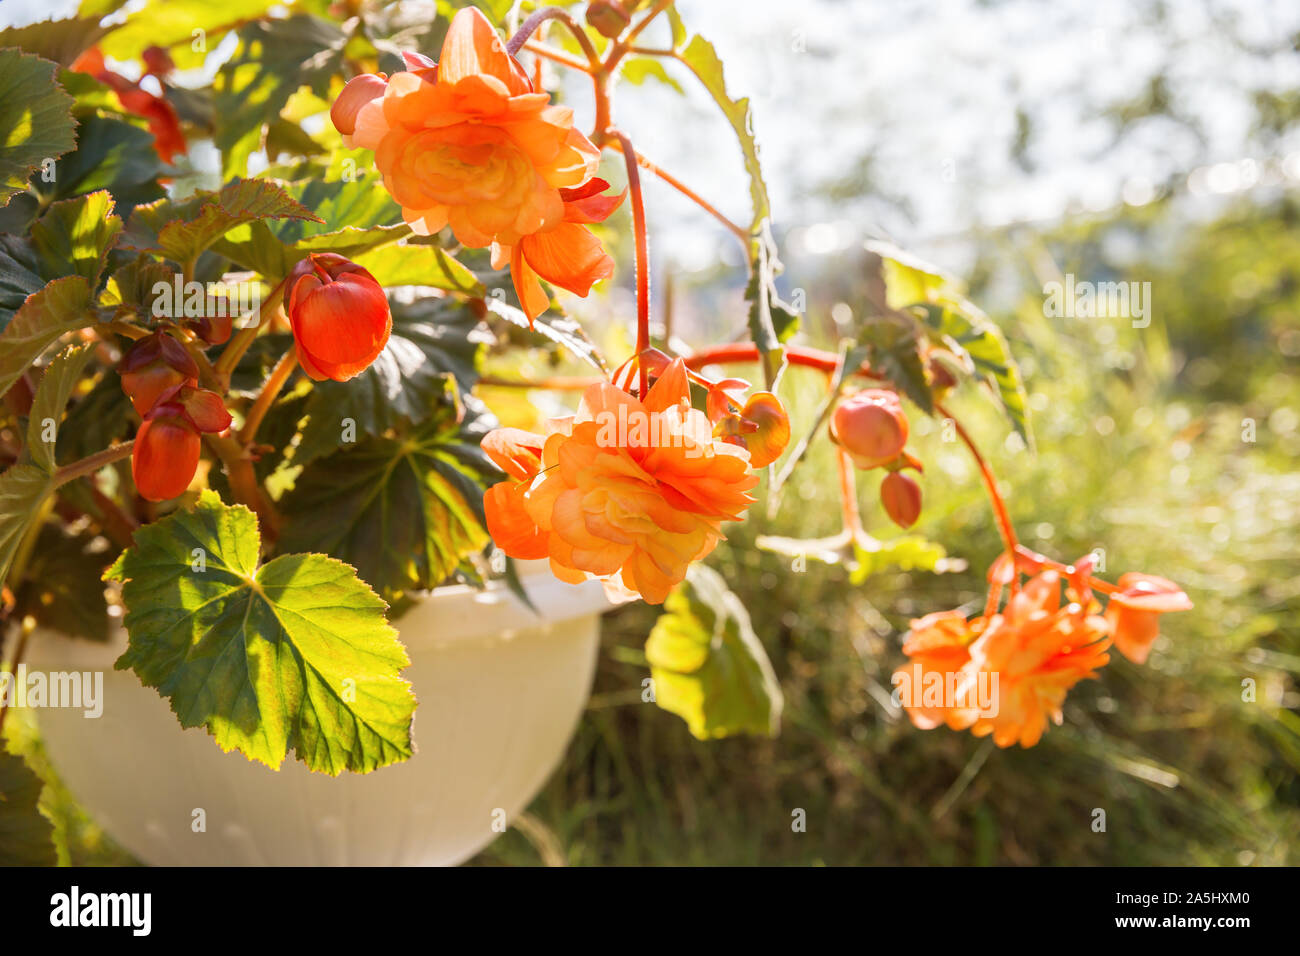 Blooming begonia grows in flowerpot in garden. Plant with large double flowers of beautiful orange hue Stock Photo